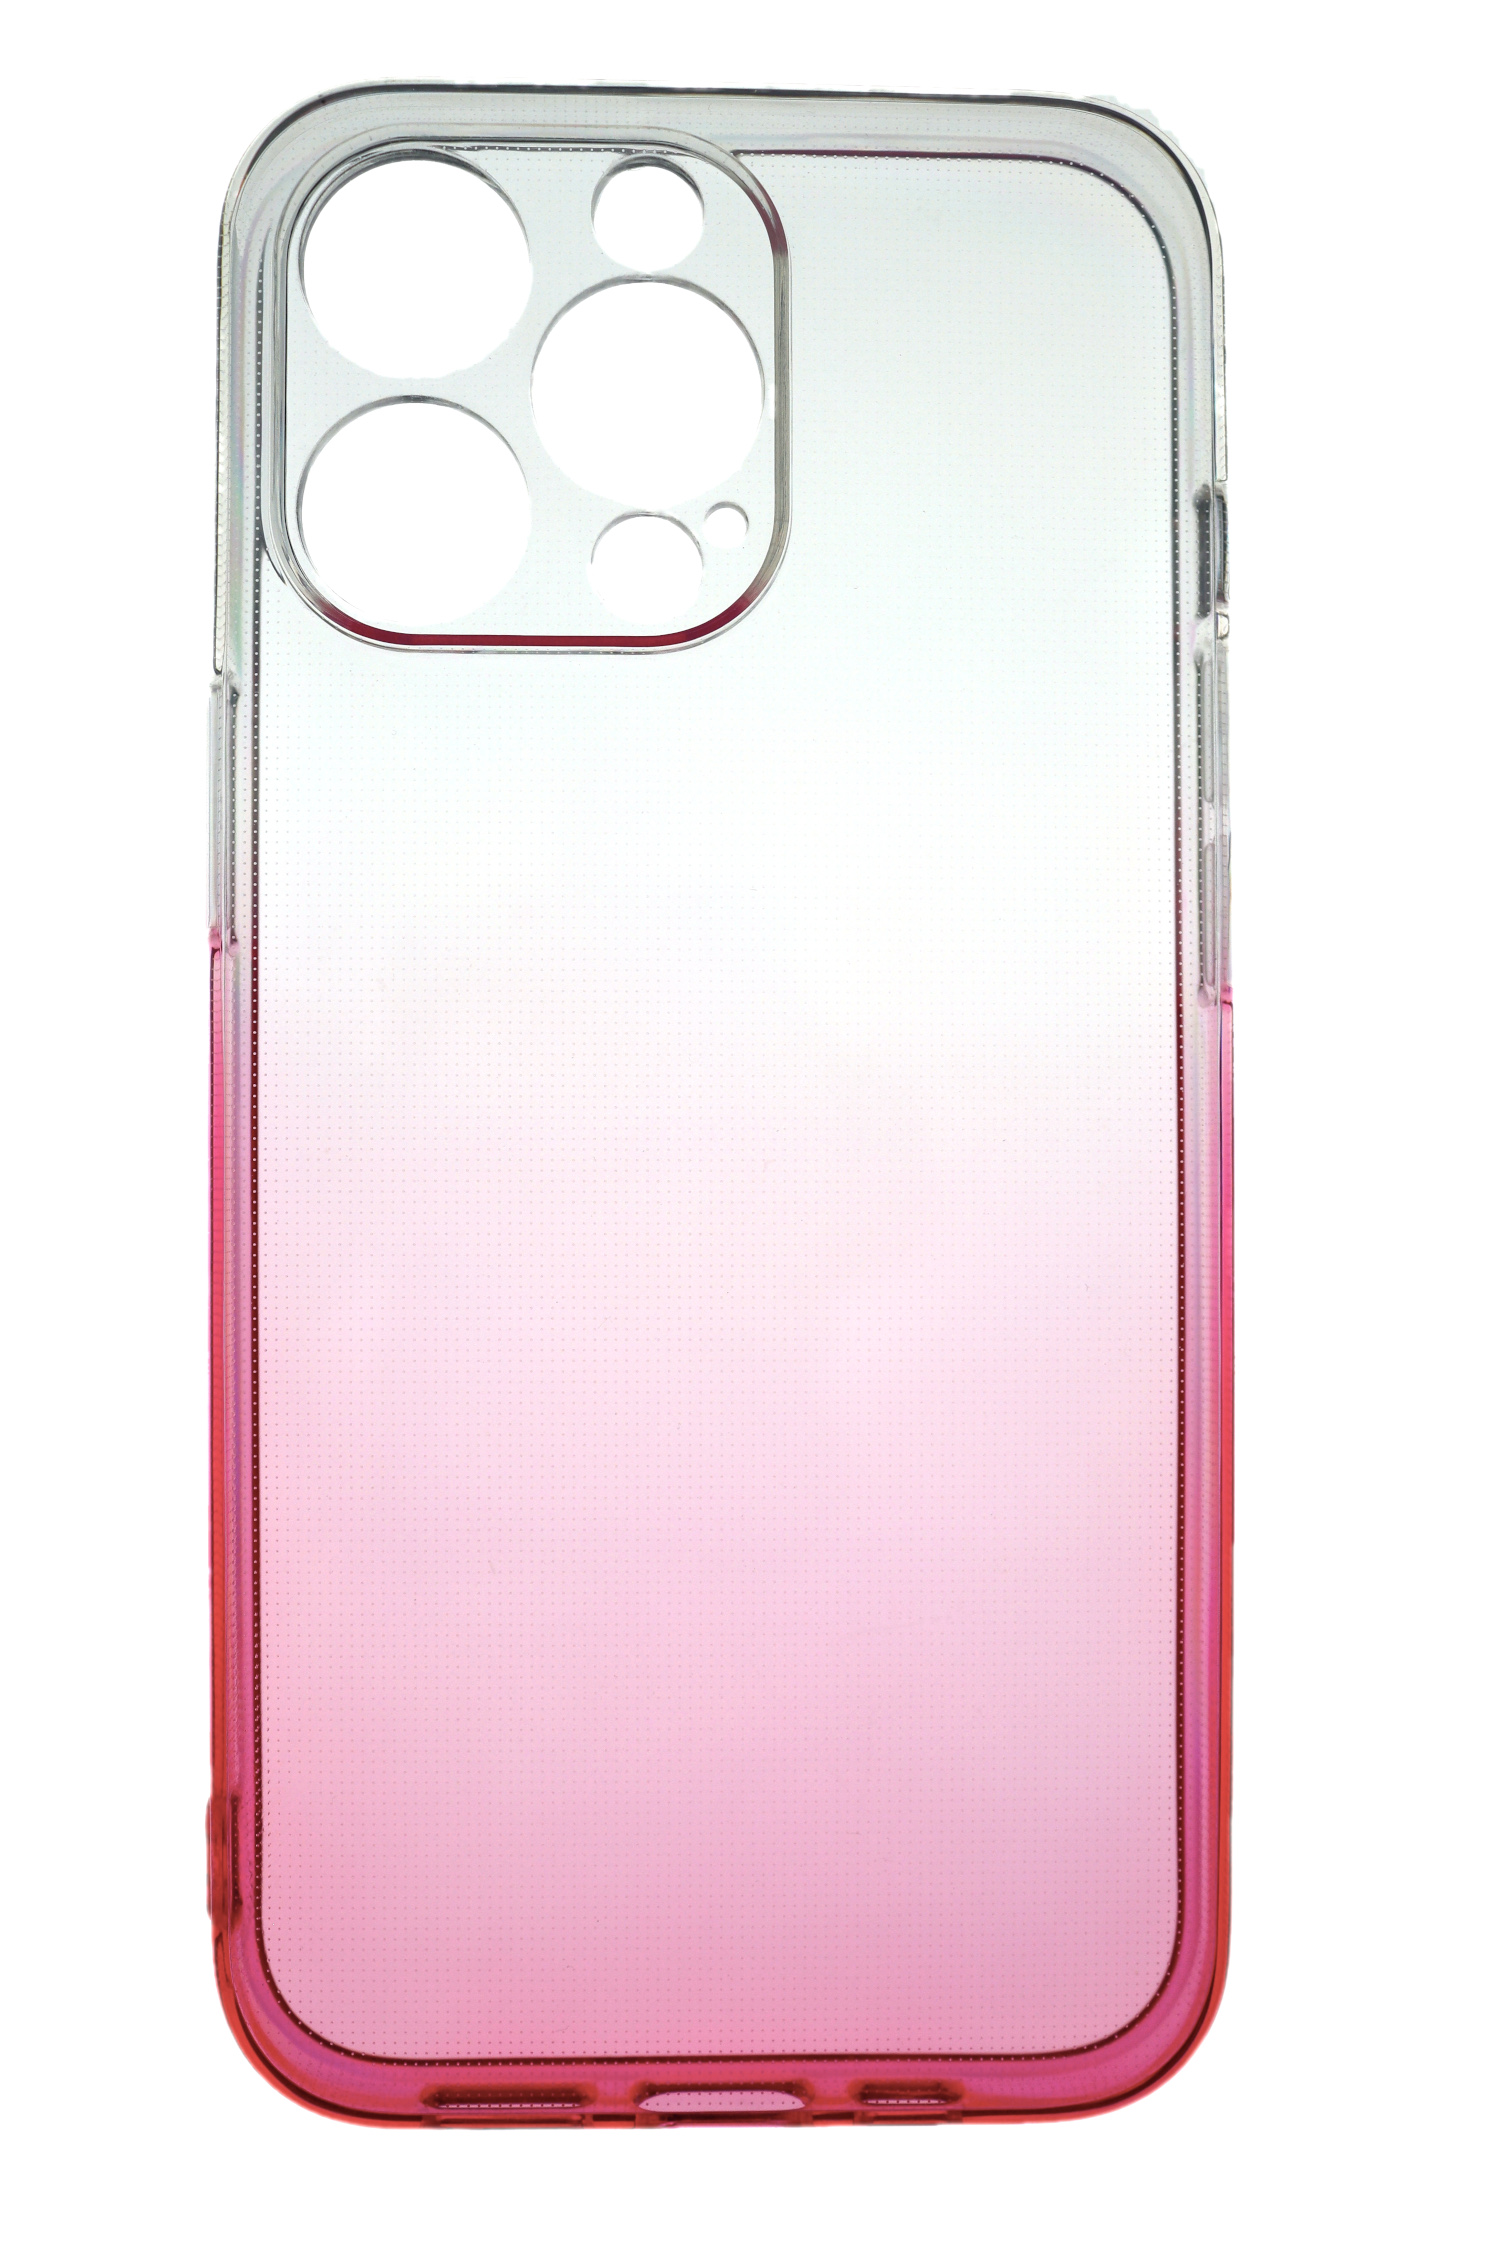 JAMCOVER 2.0 Strong, 13 Apple, Pink, Pro Transparent iPhone Backcover, TPU Case Max, mm